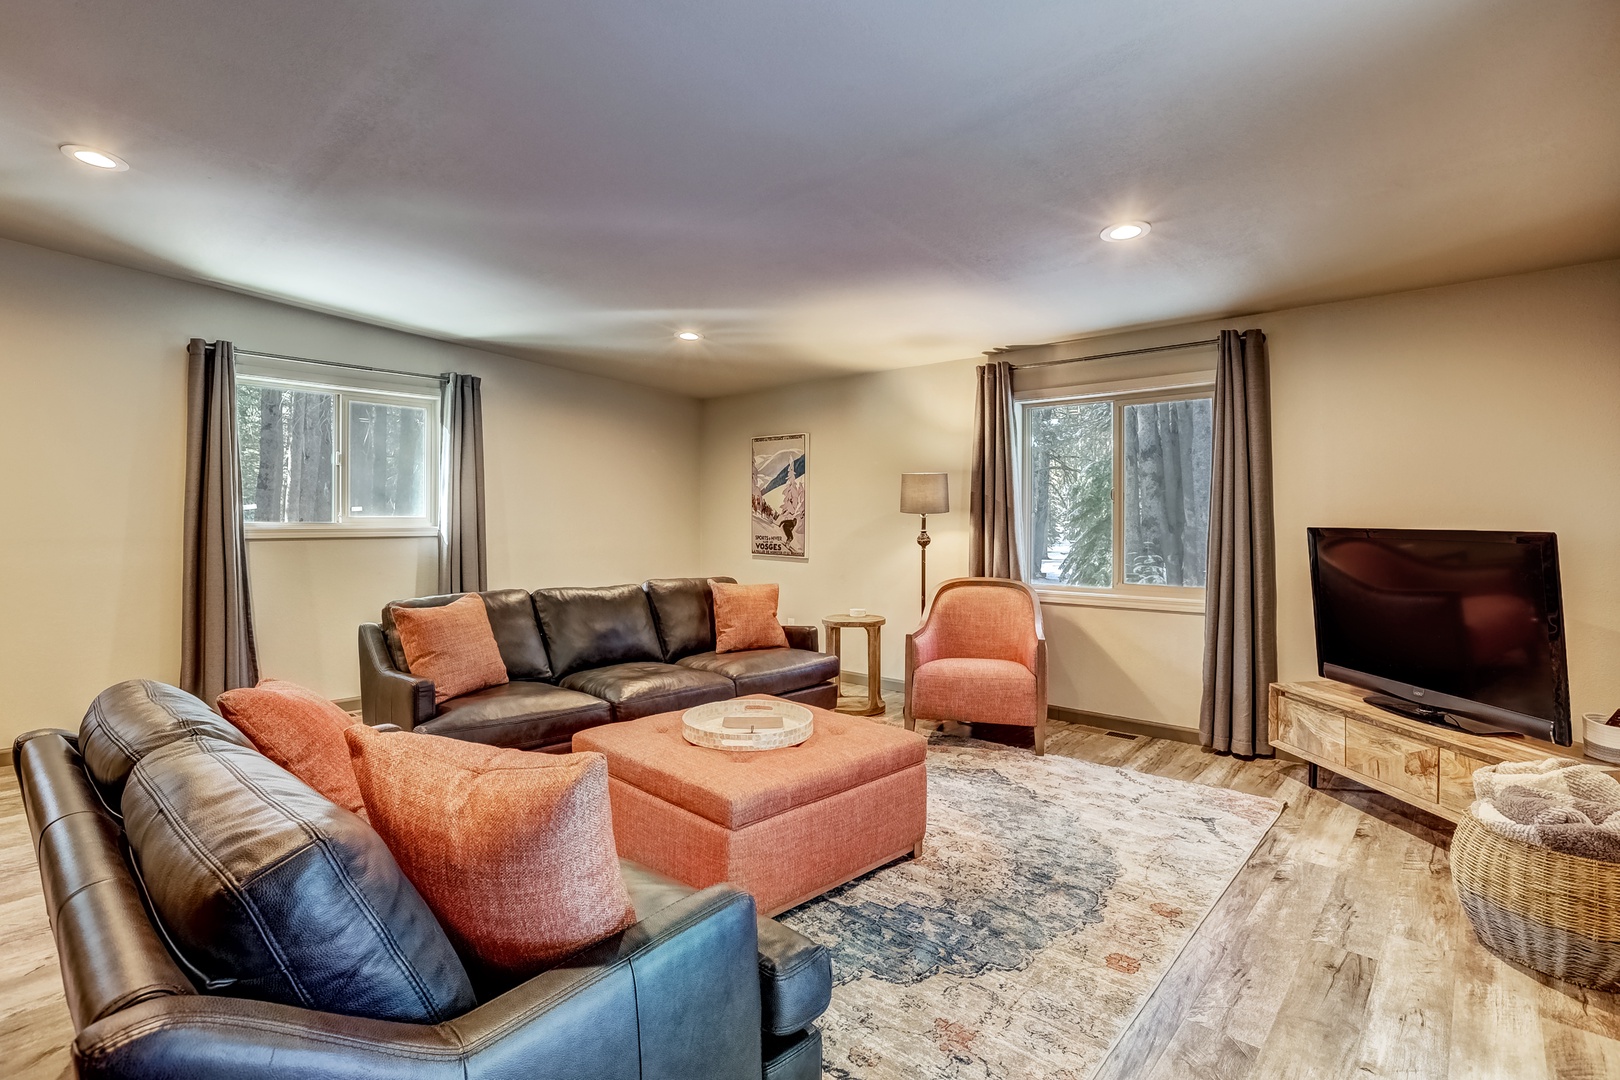 Relax together and enjoy a movie or a show in the family room